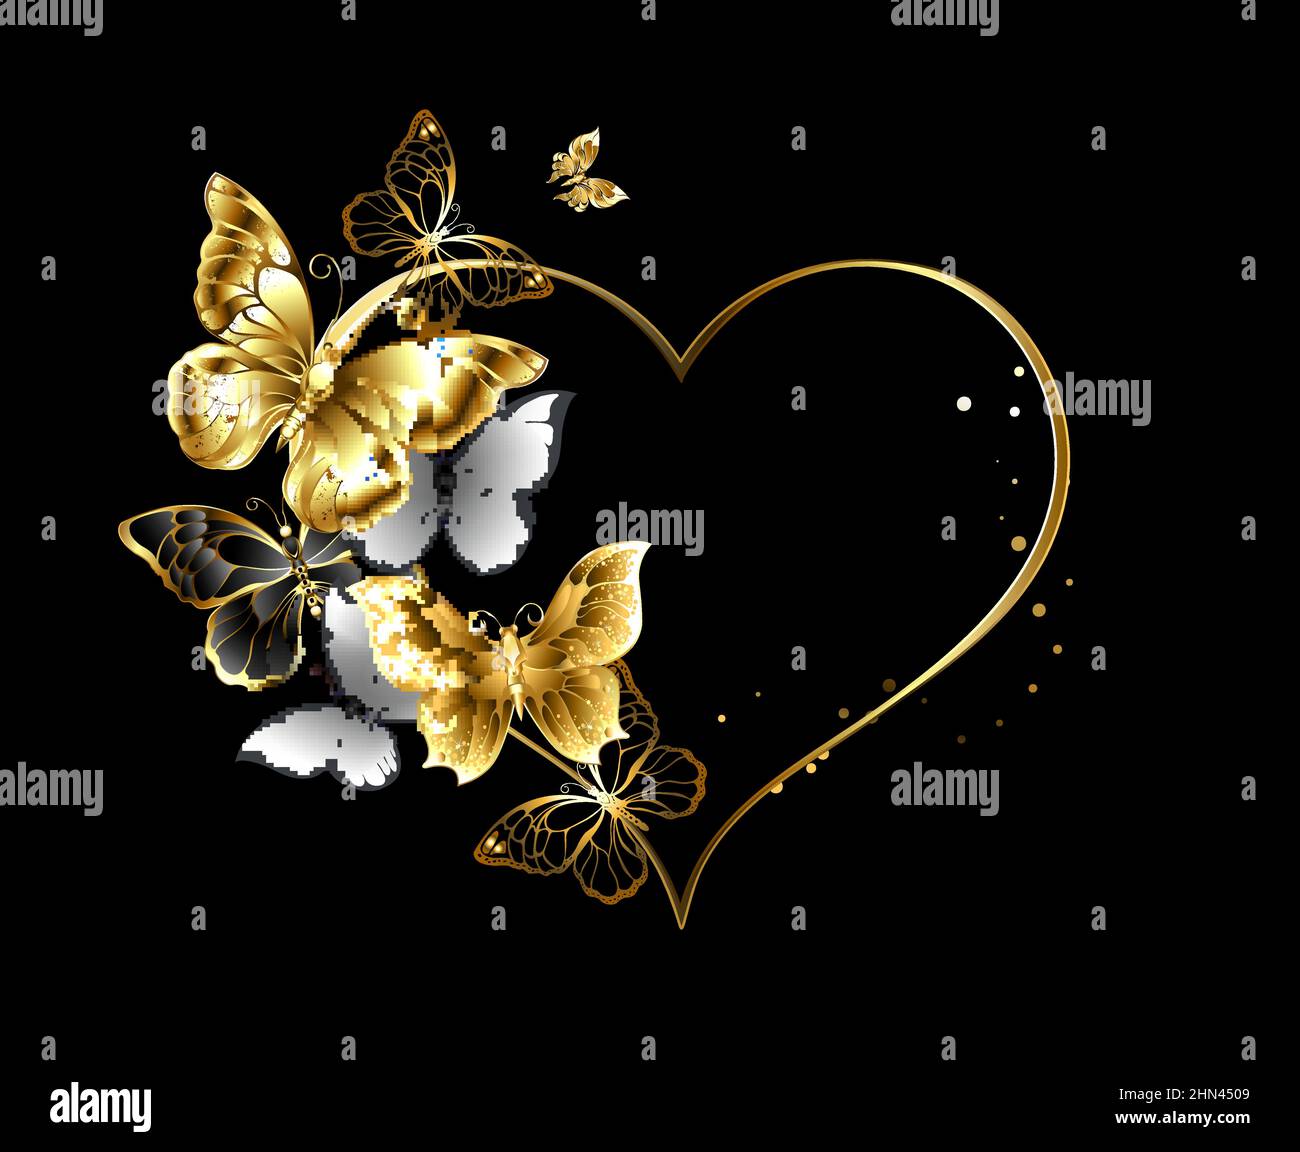 Gold heart shaped frame, decorated with gold, jewelry and white butterflies on black background. Stock Vector